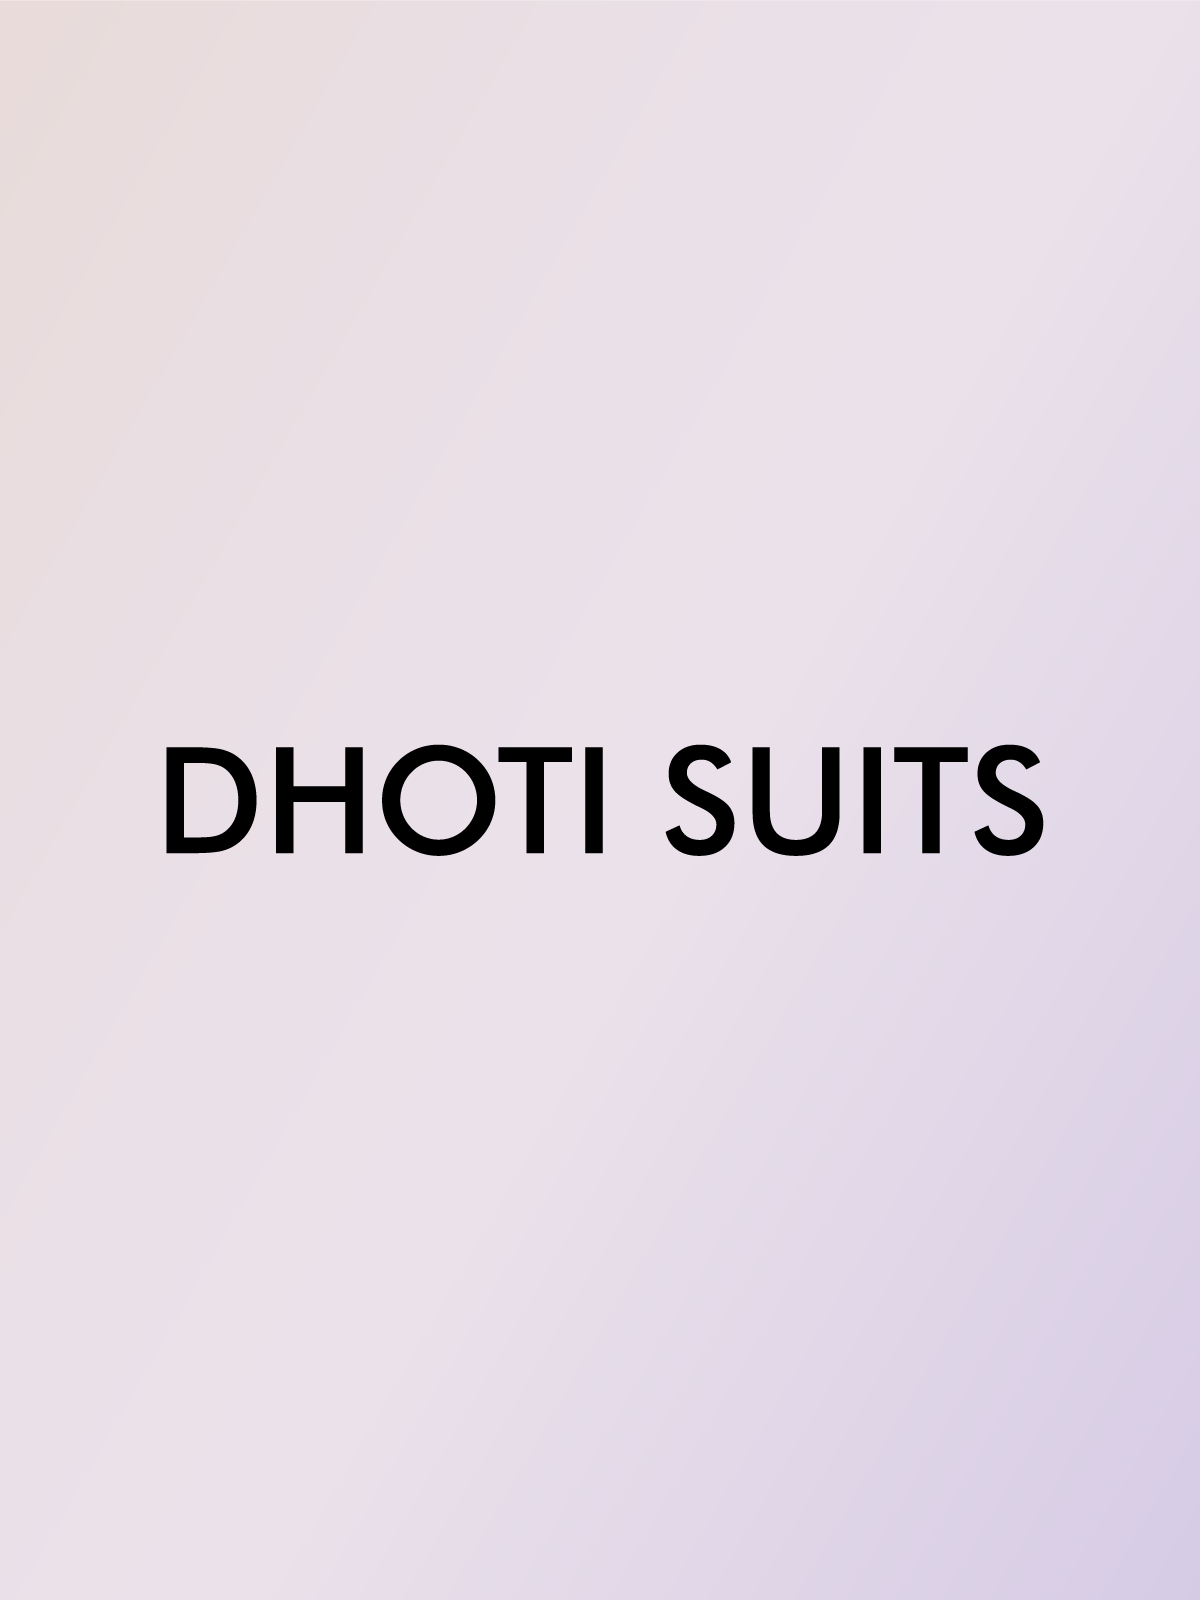 DHOTI SUITS